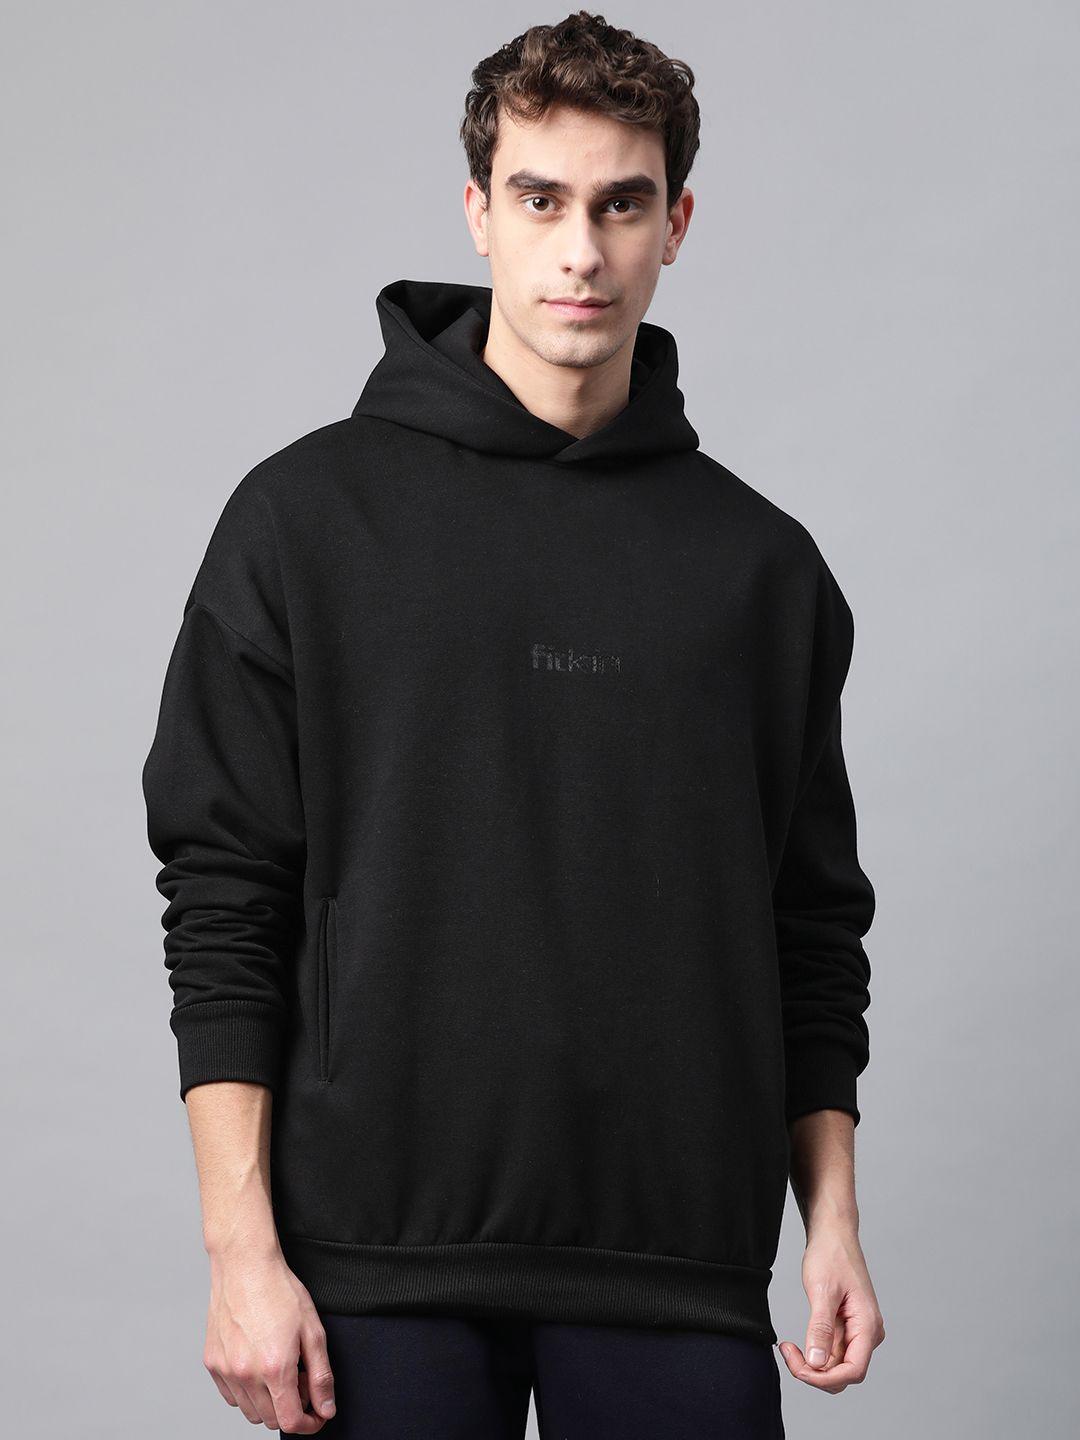 fitkin-men-black-solid-hooded-winter-sweatshirt-with-brand-logo-print-detail